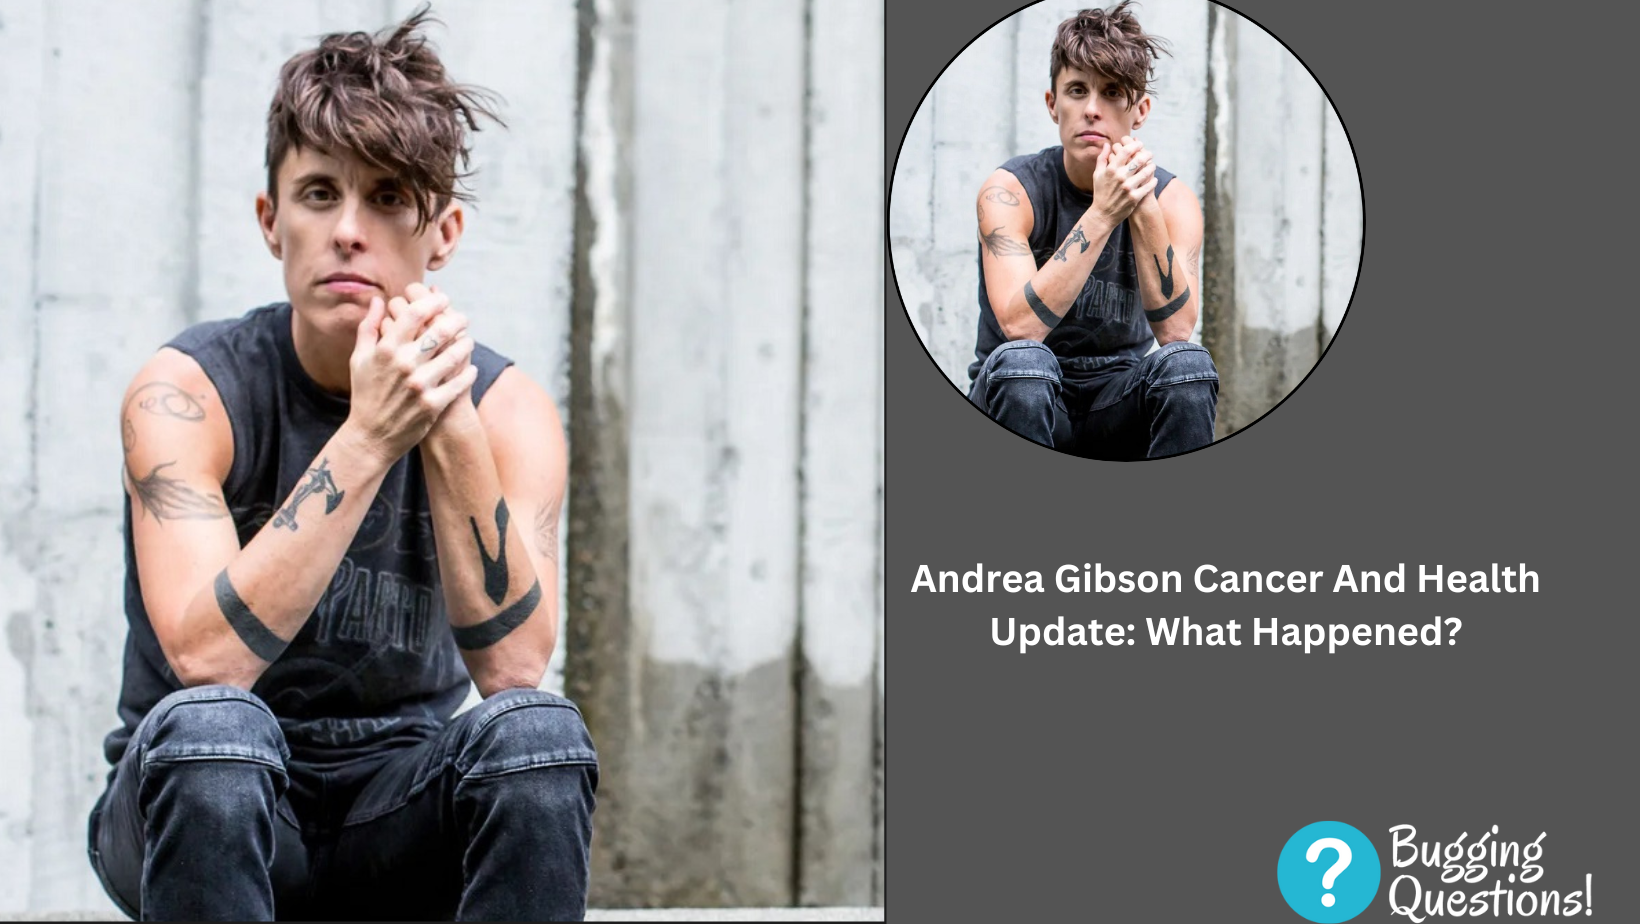 Andrea Gibson Cancer And Health Update: What Happened?